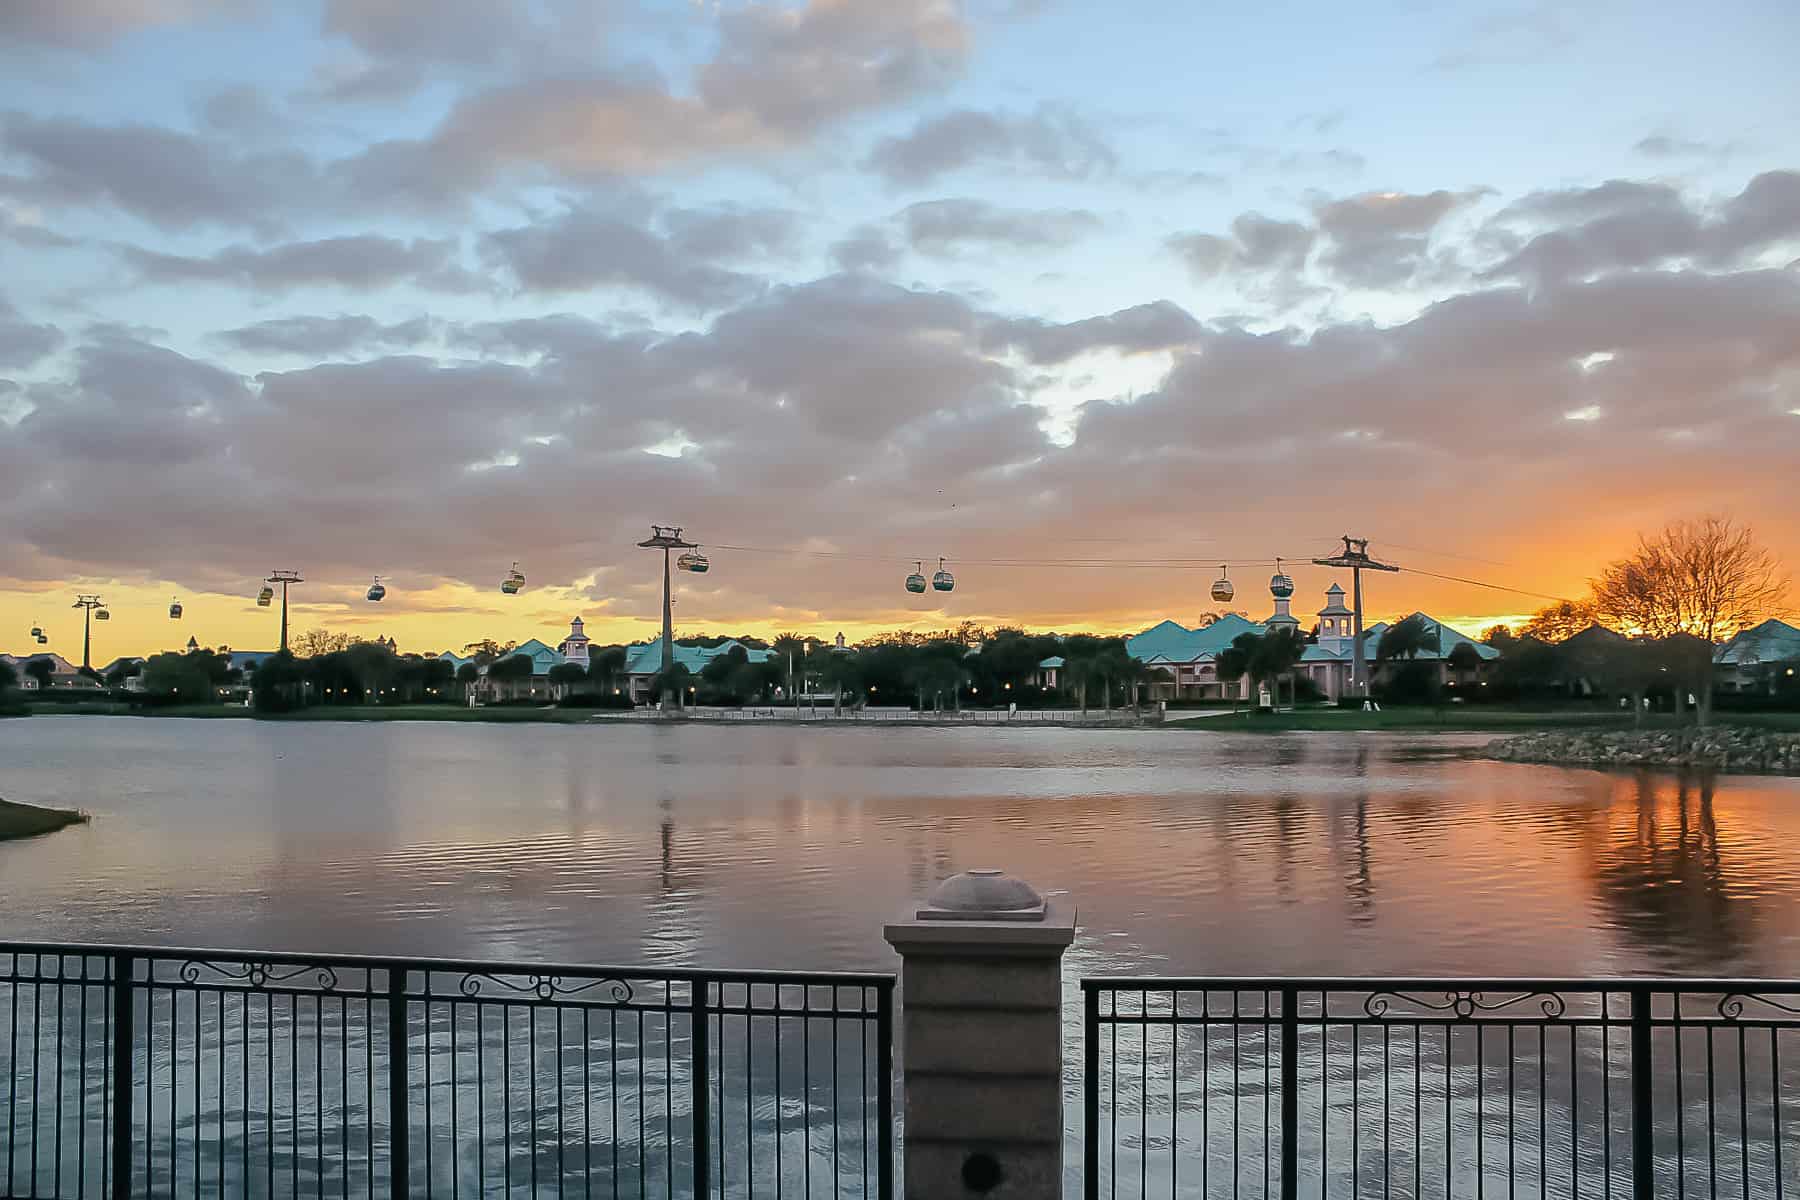 a view of the lake from Disney's Riviera at sunset with the Skyliner 